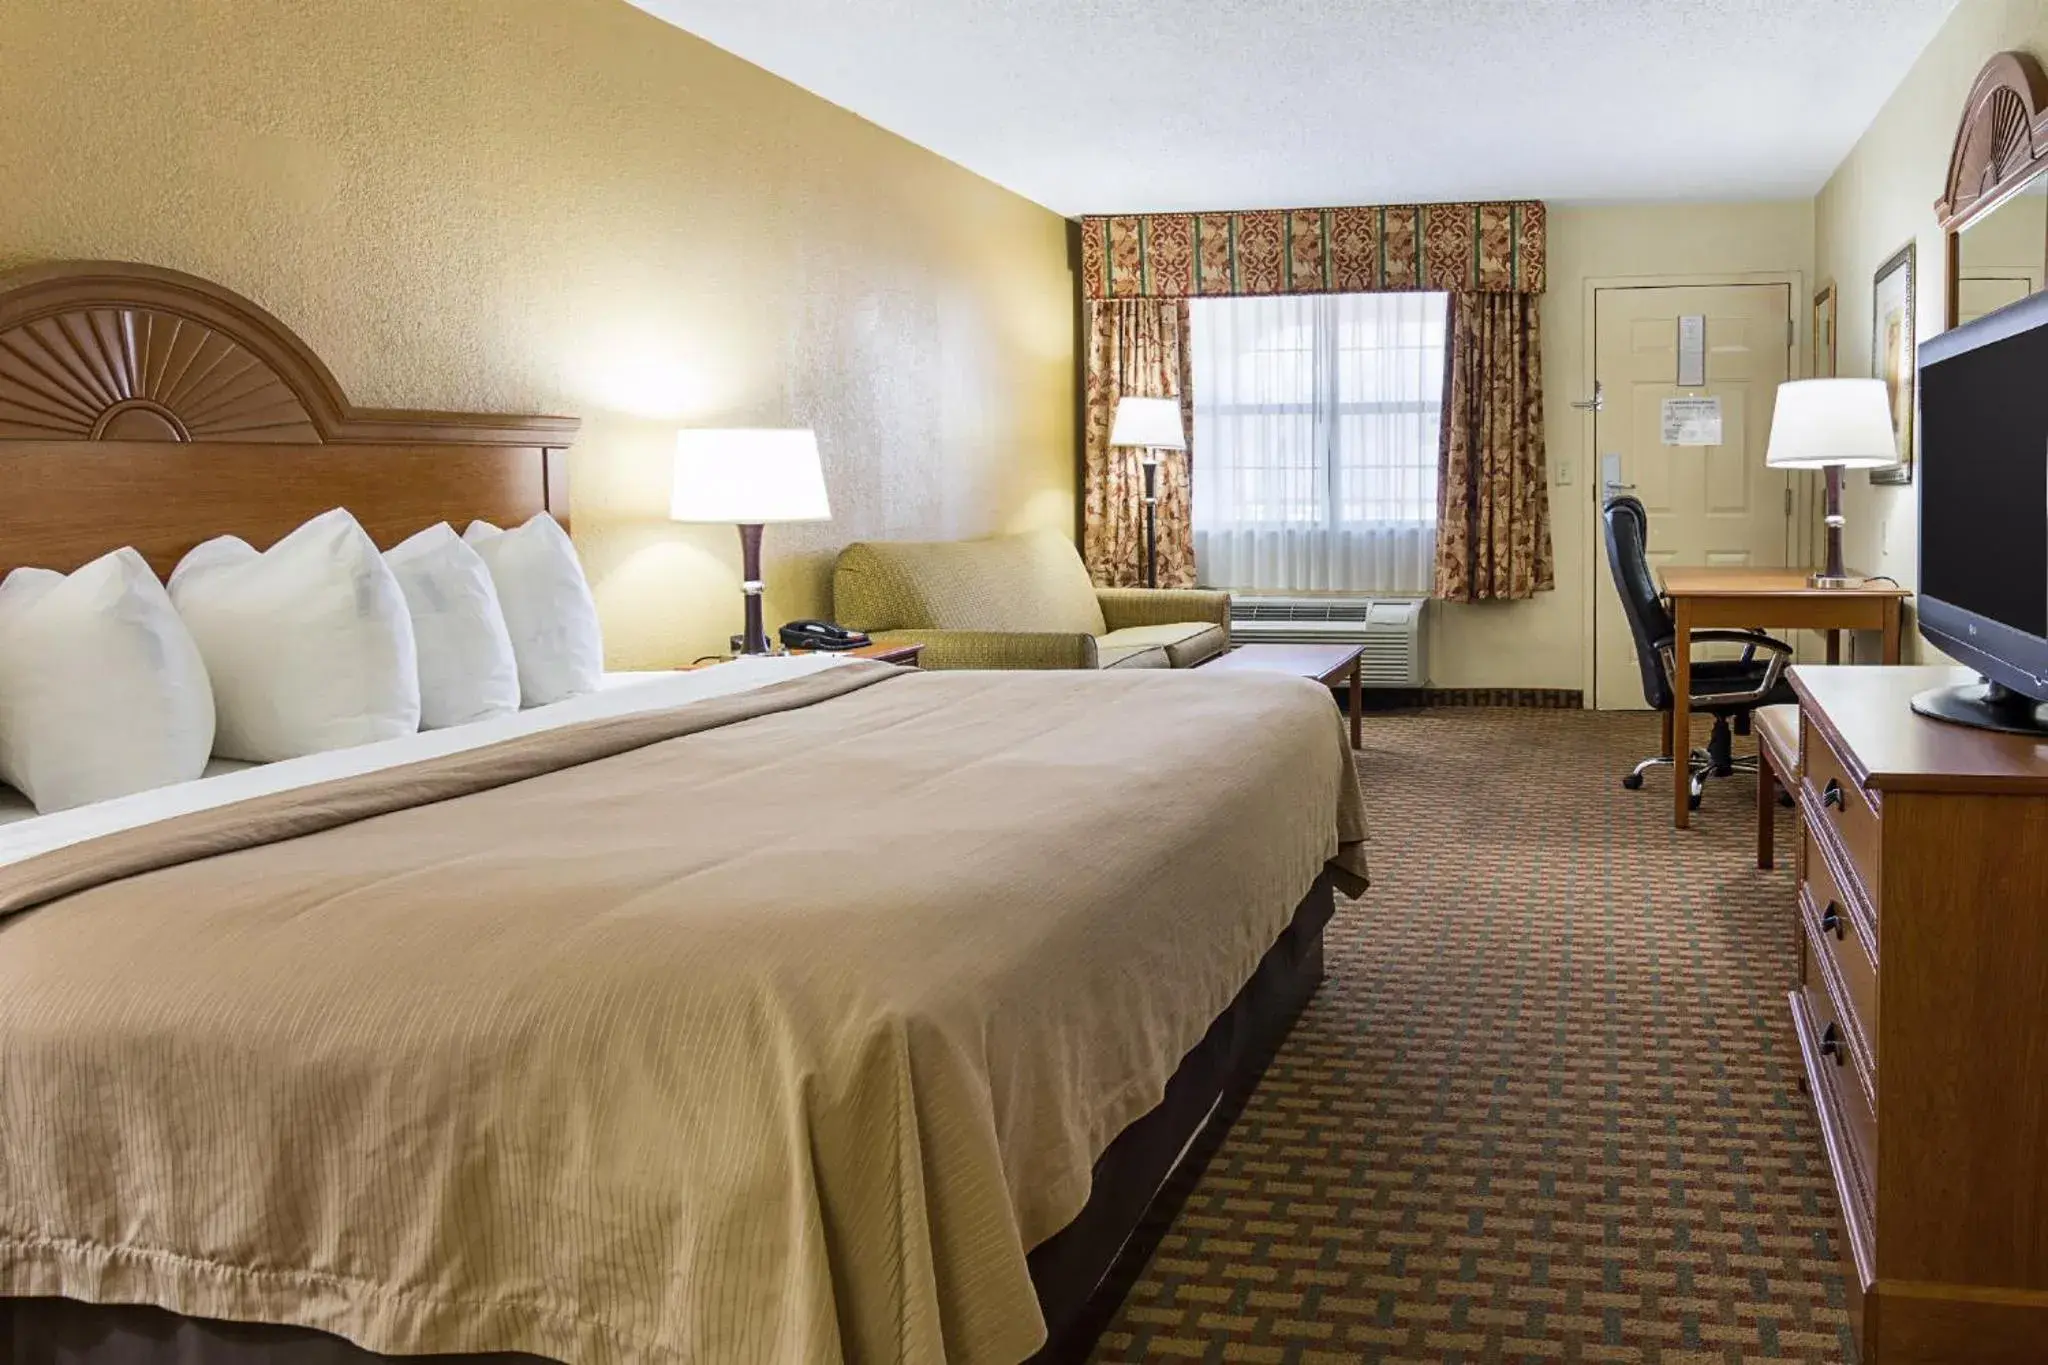 Superior King Room with Sofa Bed - Non-Smoking in Quality Inn near Casinos and Convention Center